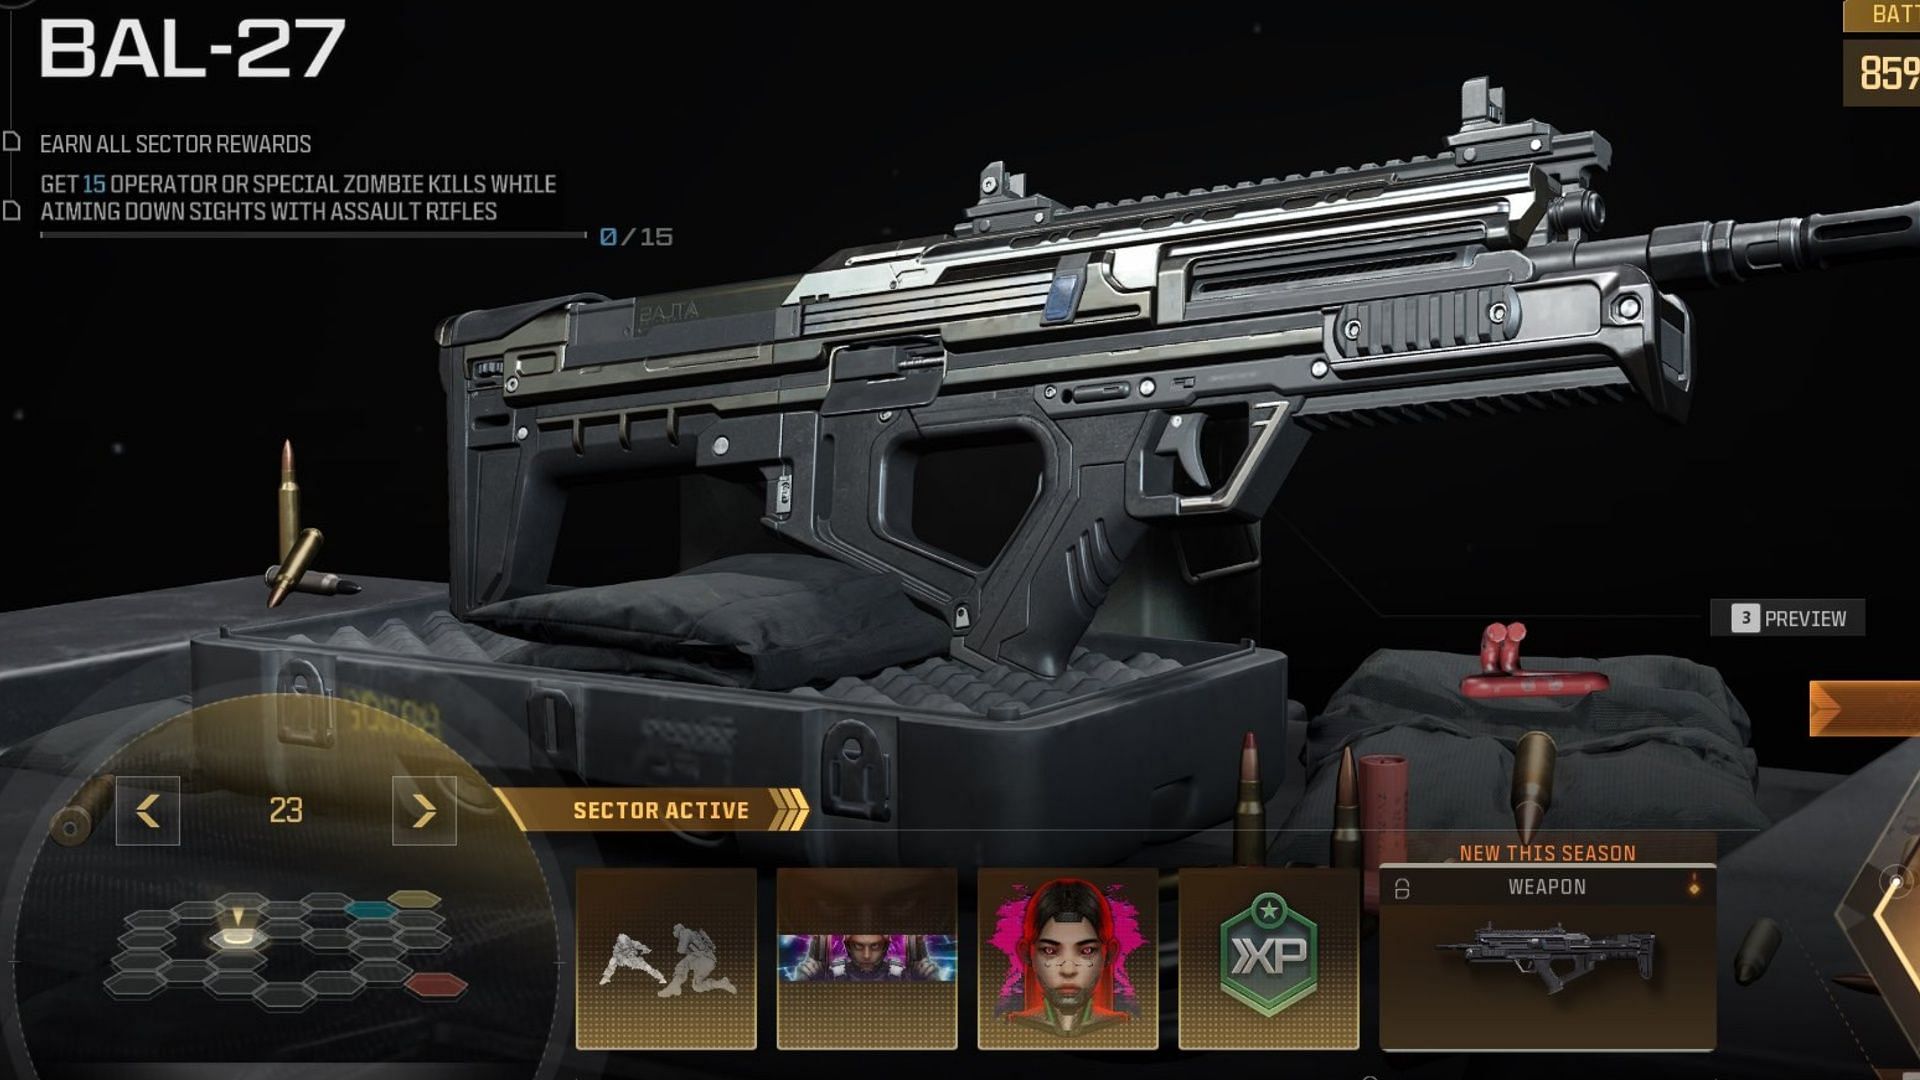 Unlocking BAL-27 via Battle Pass sector in Warzone and MW3 (image via Activision)